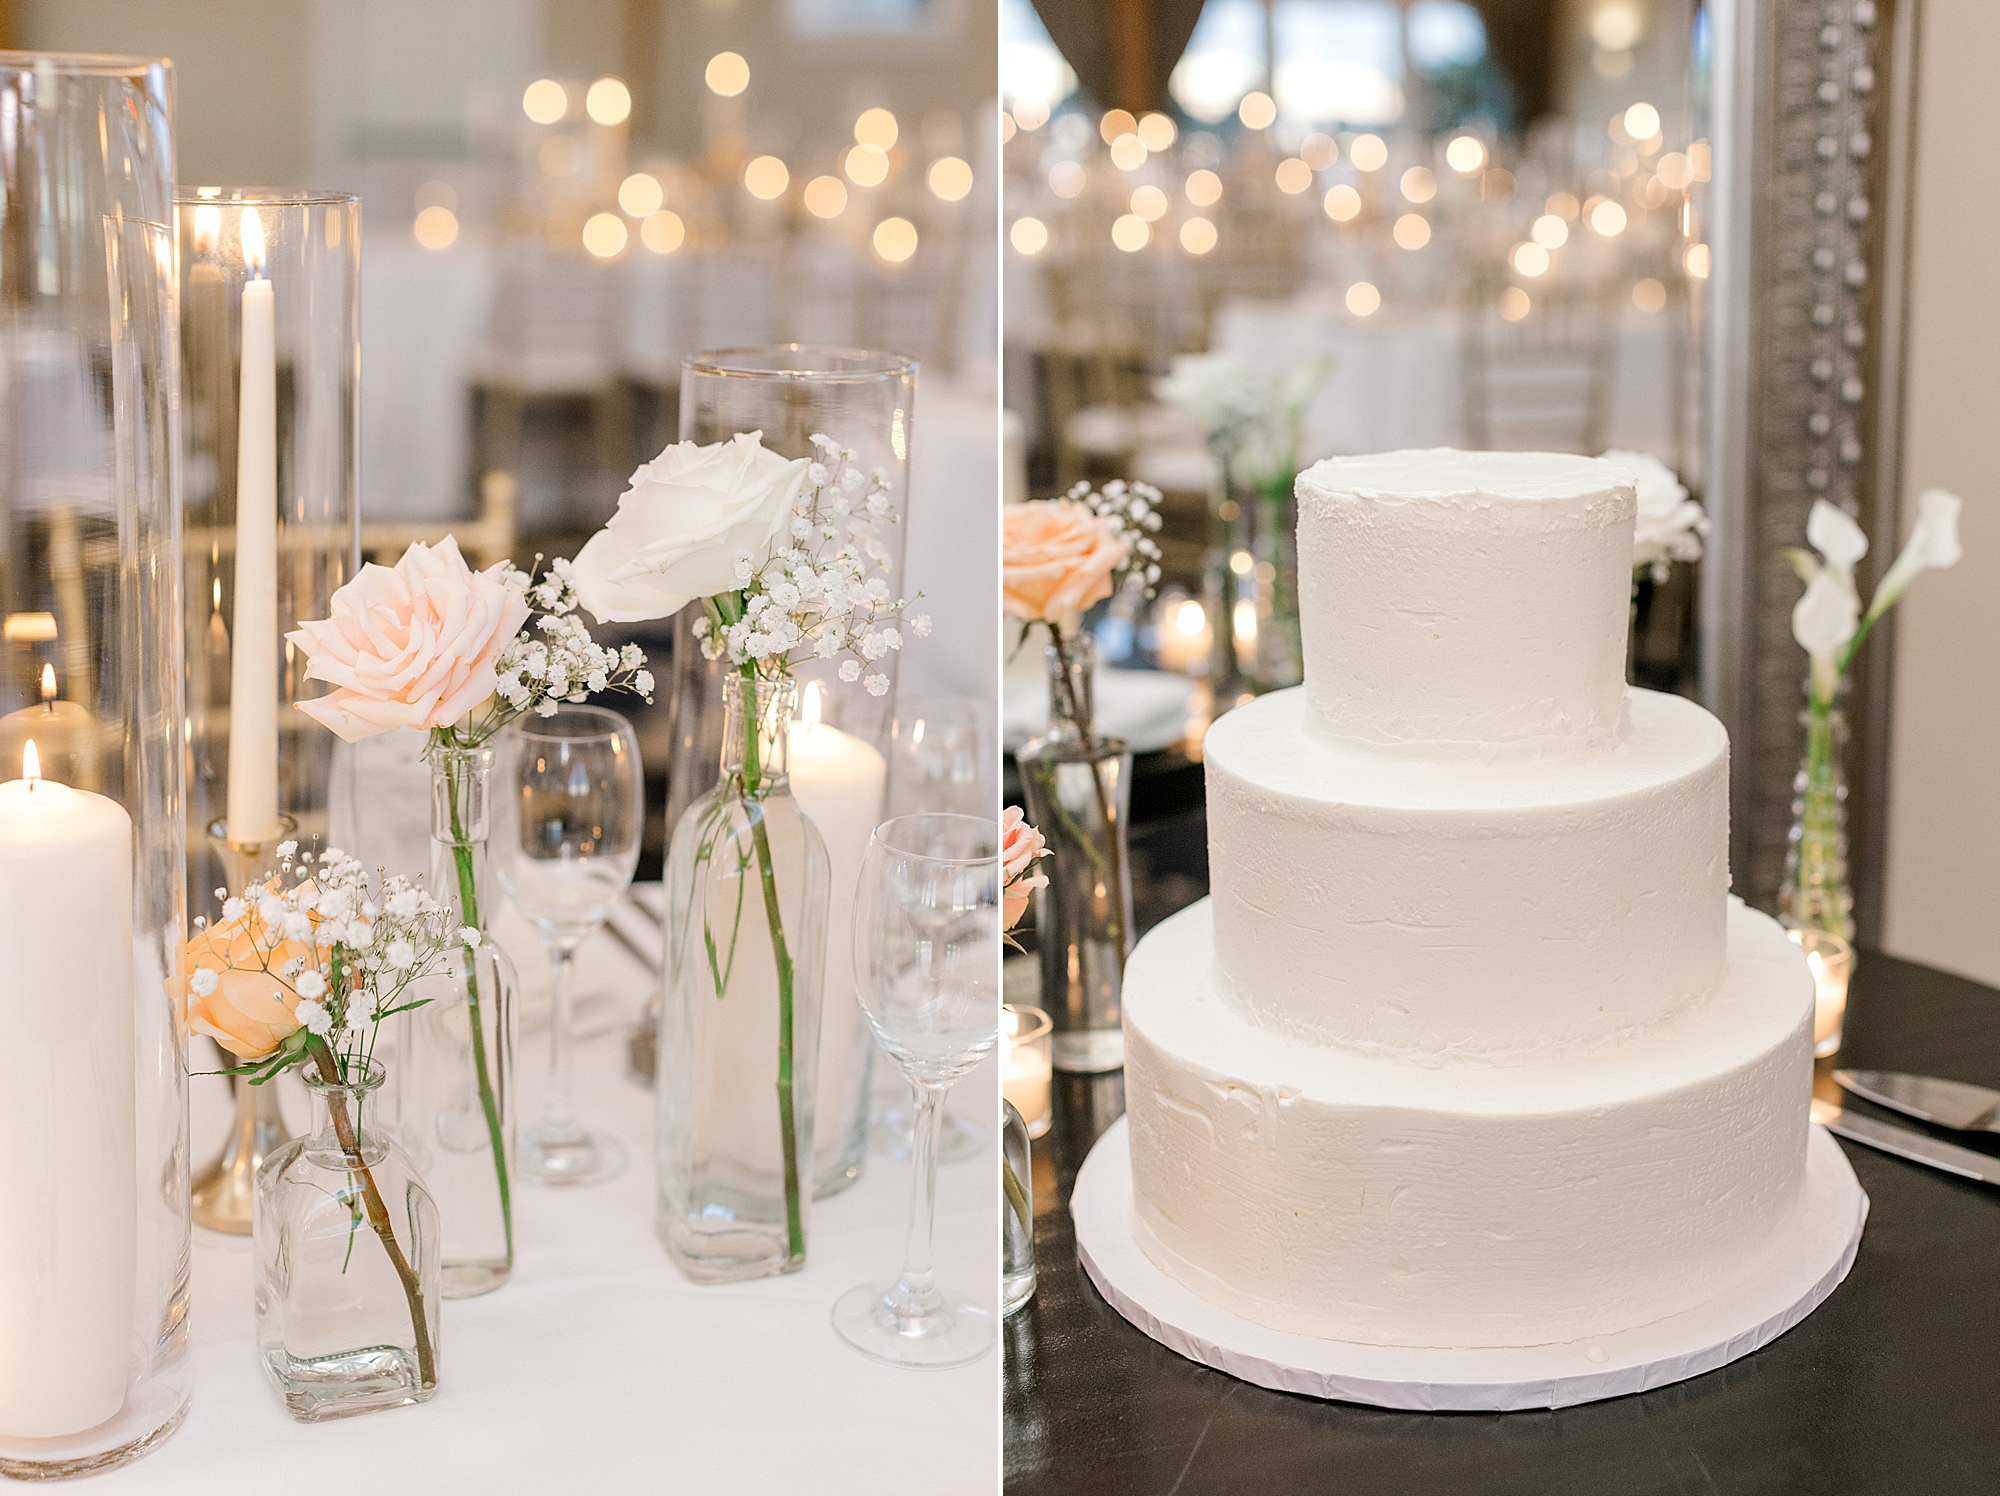 tiered wedding cake with simple white icing for summer wedding reception at Bonnet Island Estate